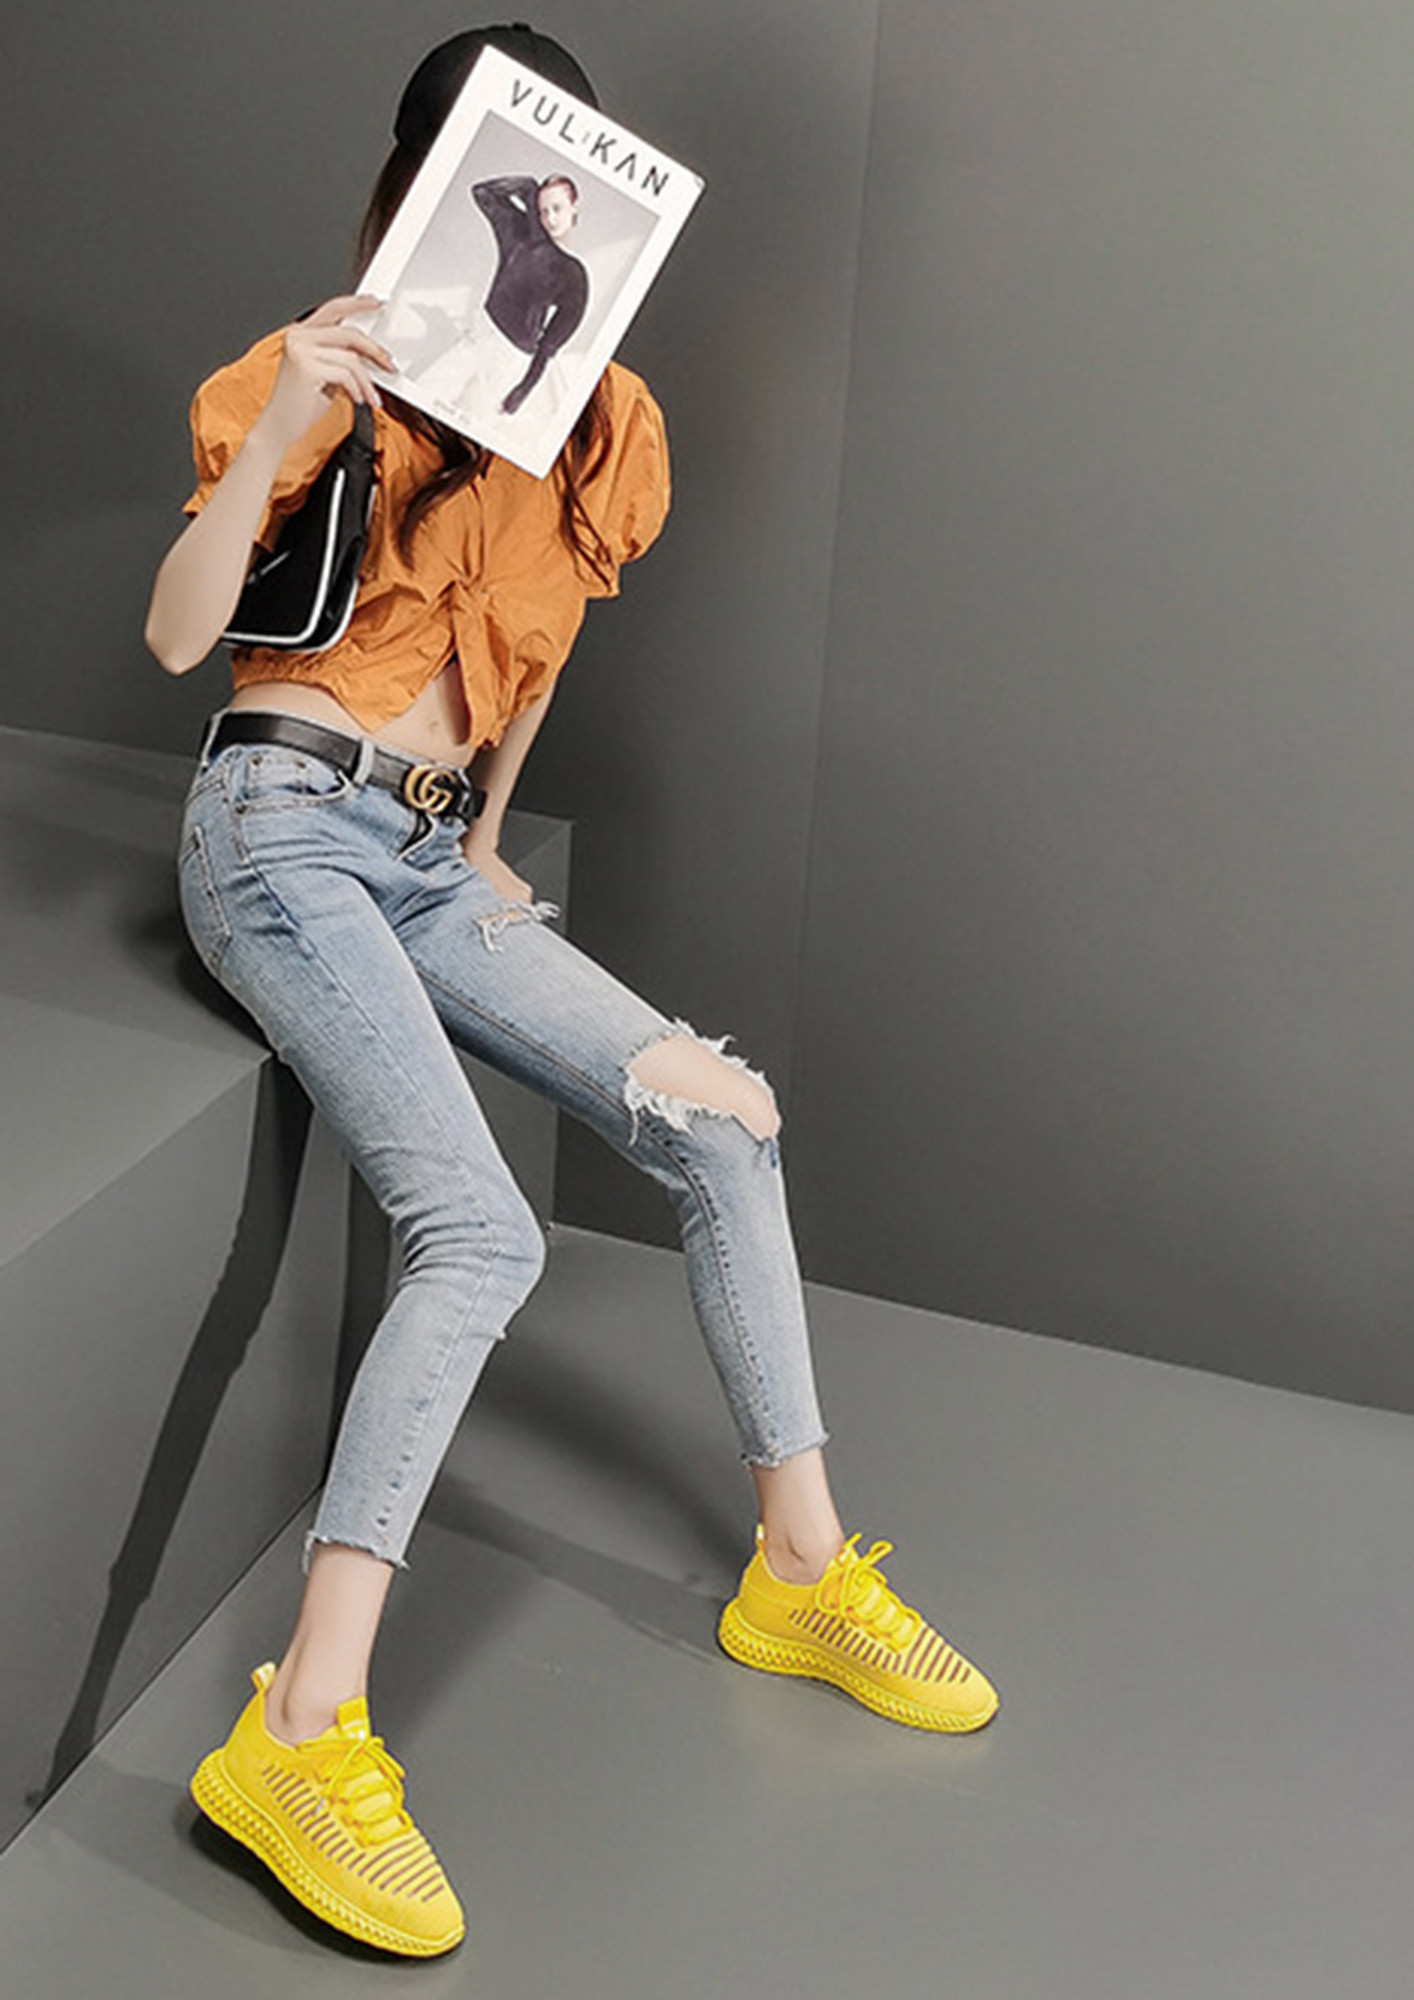 Aggregate 124+ yellow sneakers shoes best